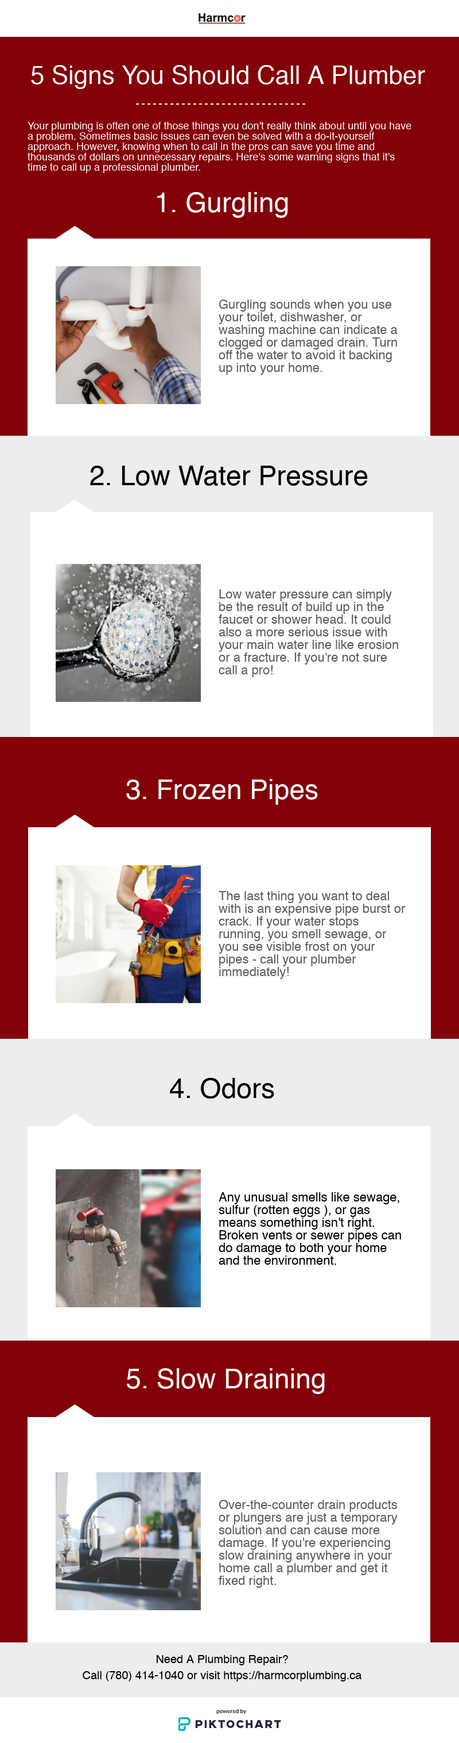 5 Signs It's Time To Call A Plumber